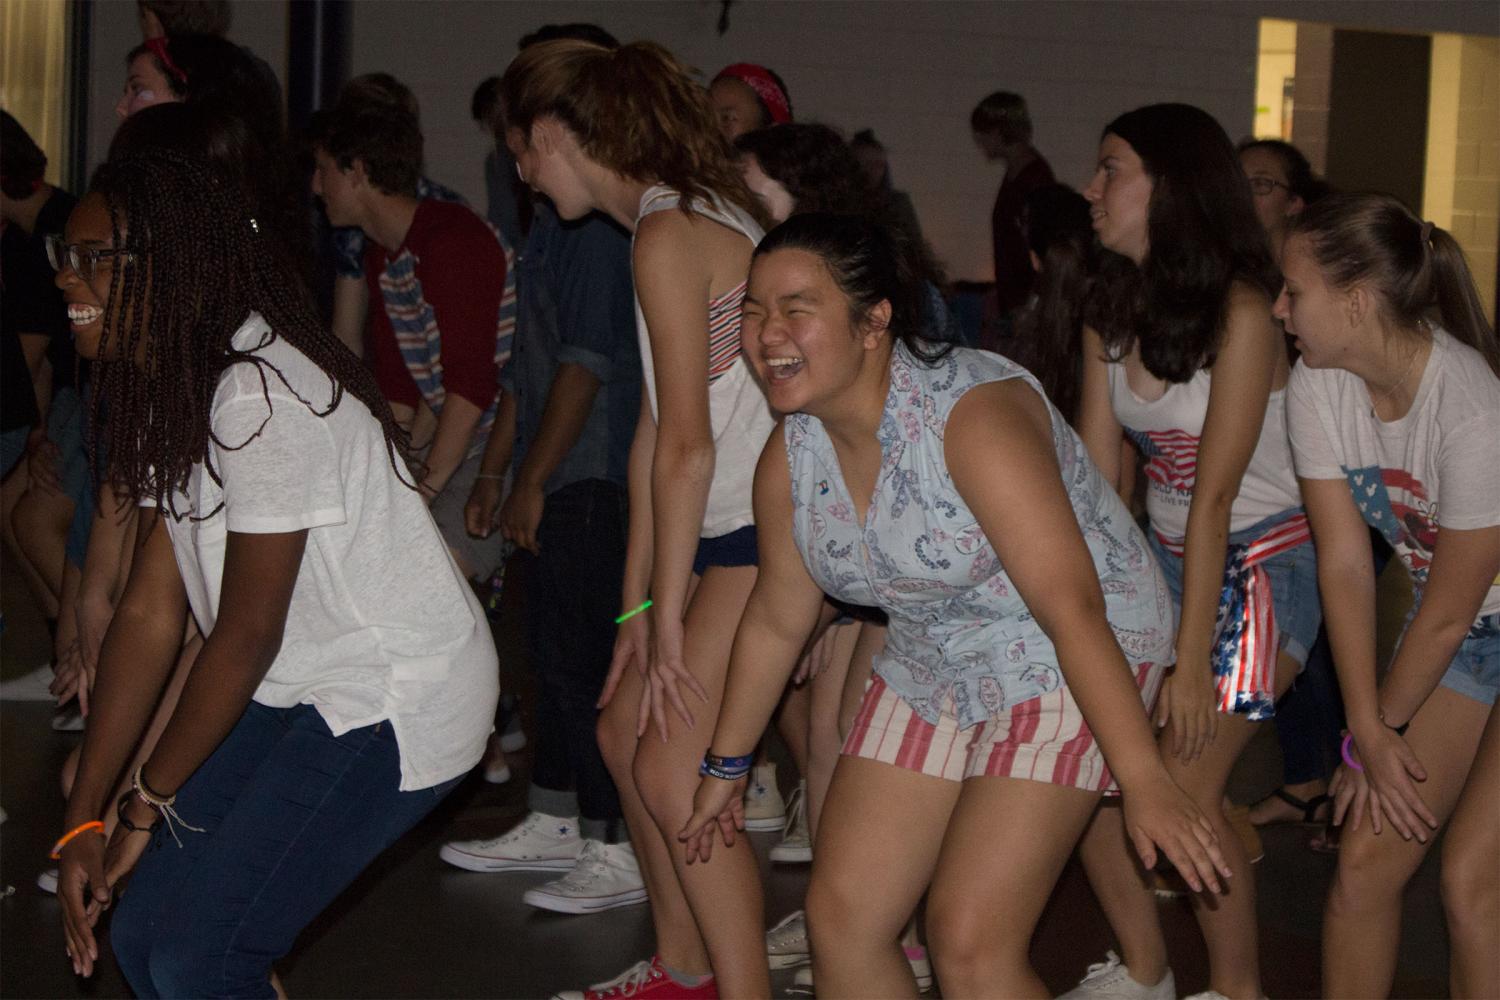 Students celebrate a Party in the USA theme at the Back to School Dance on Sep. 15.